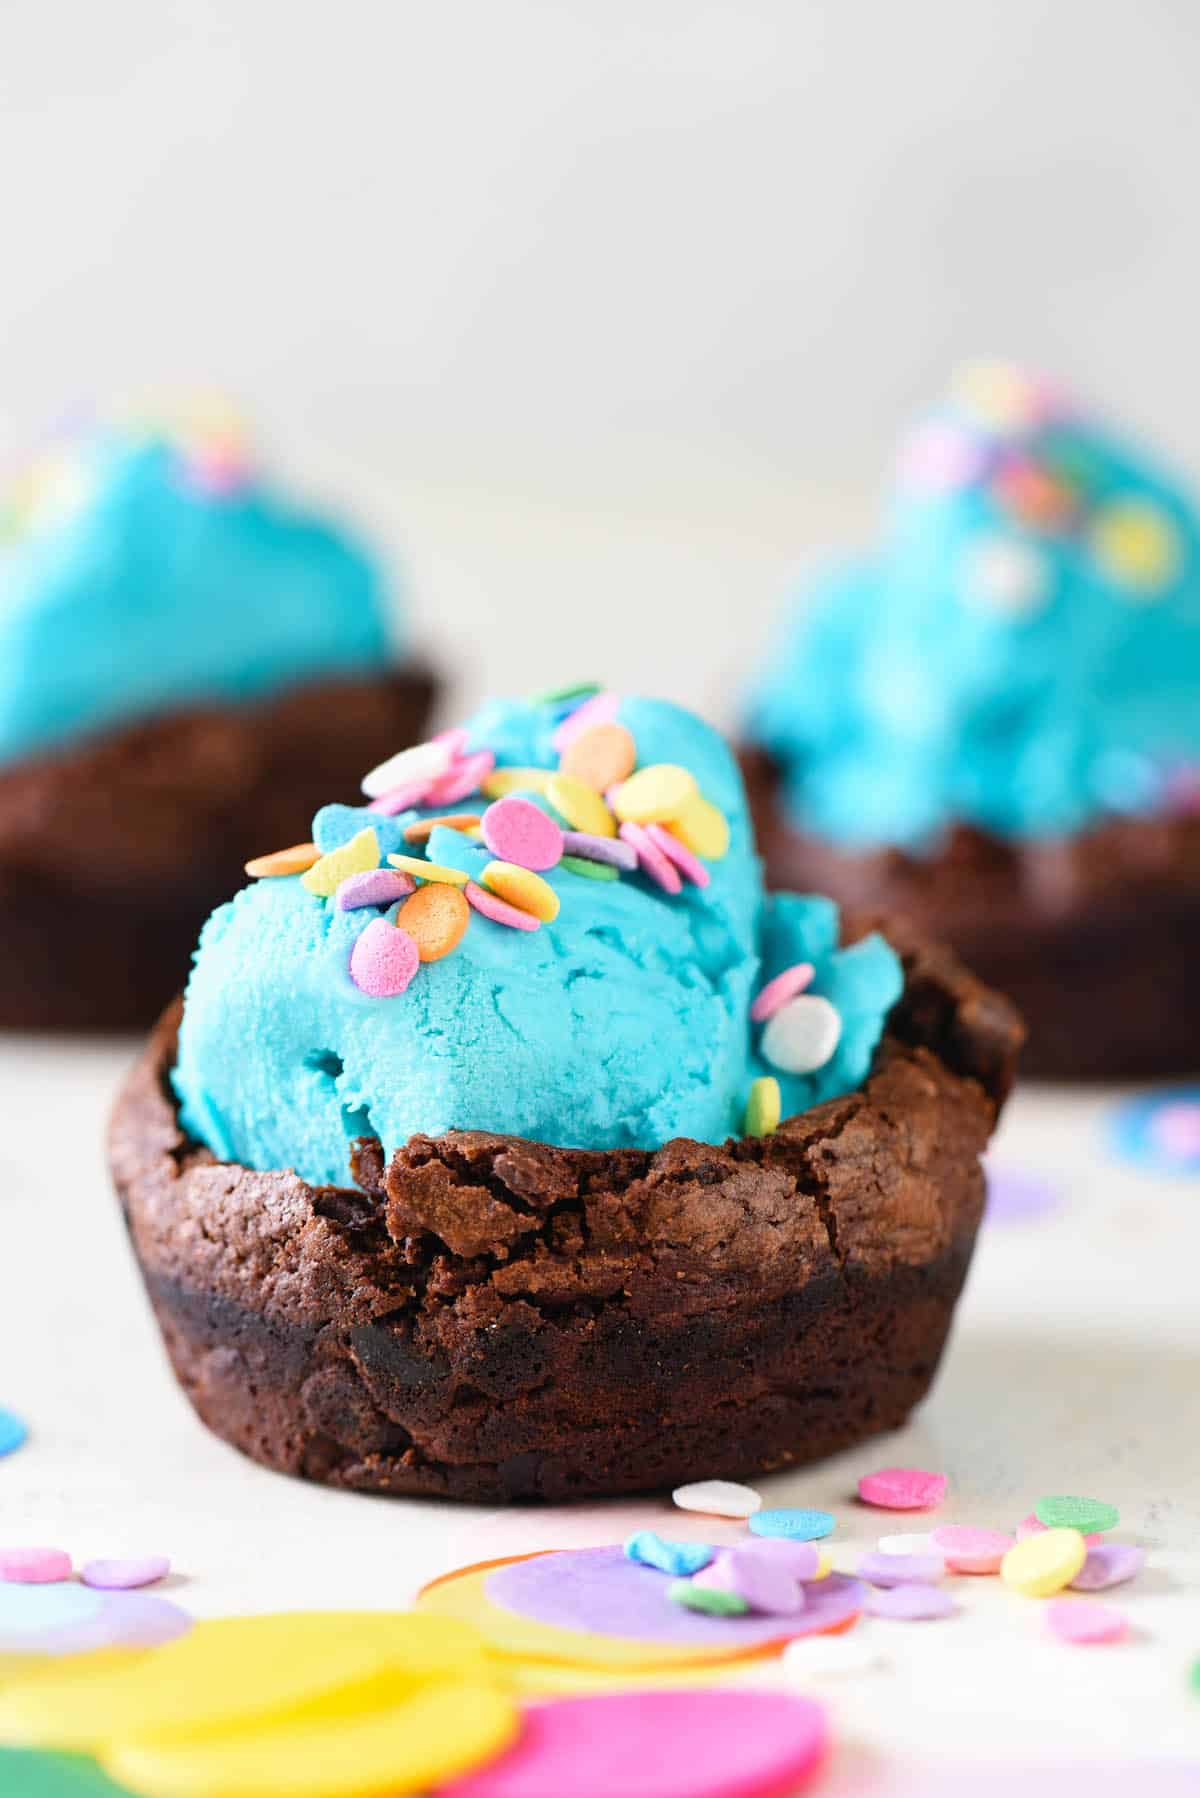 Celebrate one sweet birthday with these Brownie Bowls for Ice Cream. No special equipment needed - they're made in a cupcake pan! | foxeslovelemons.com